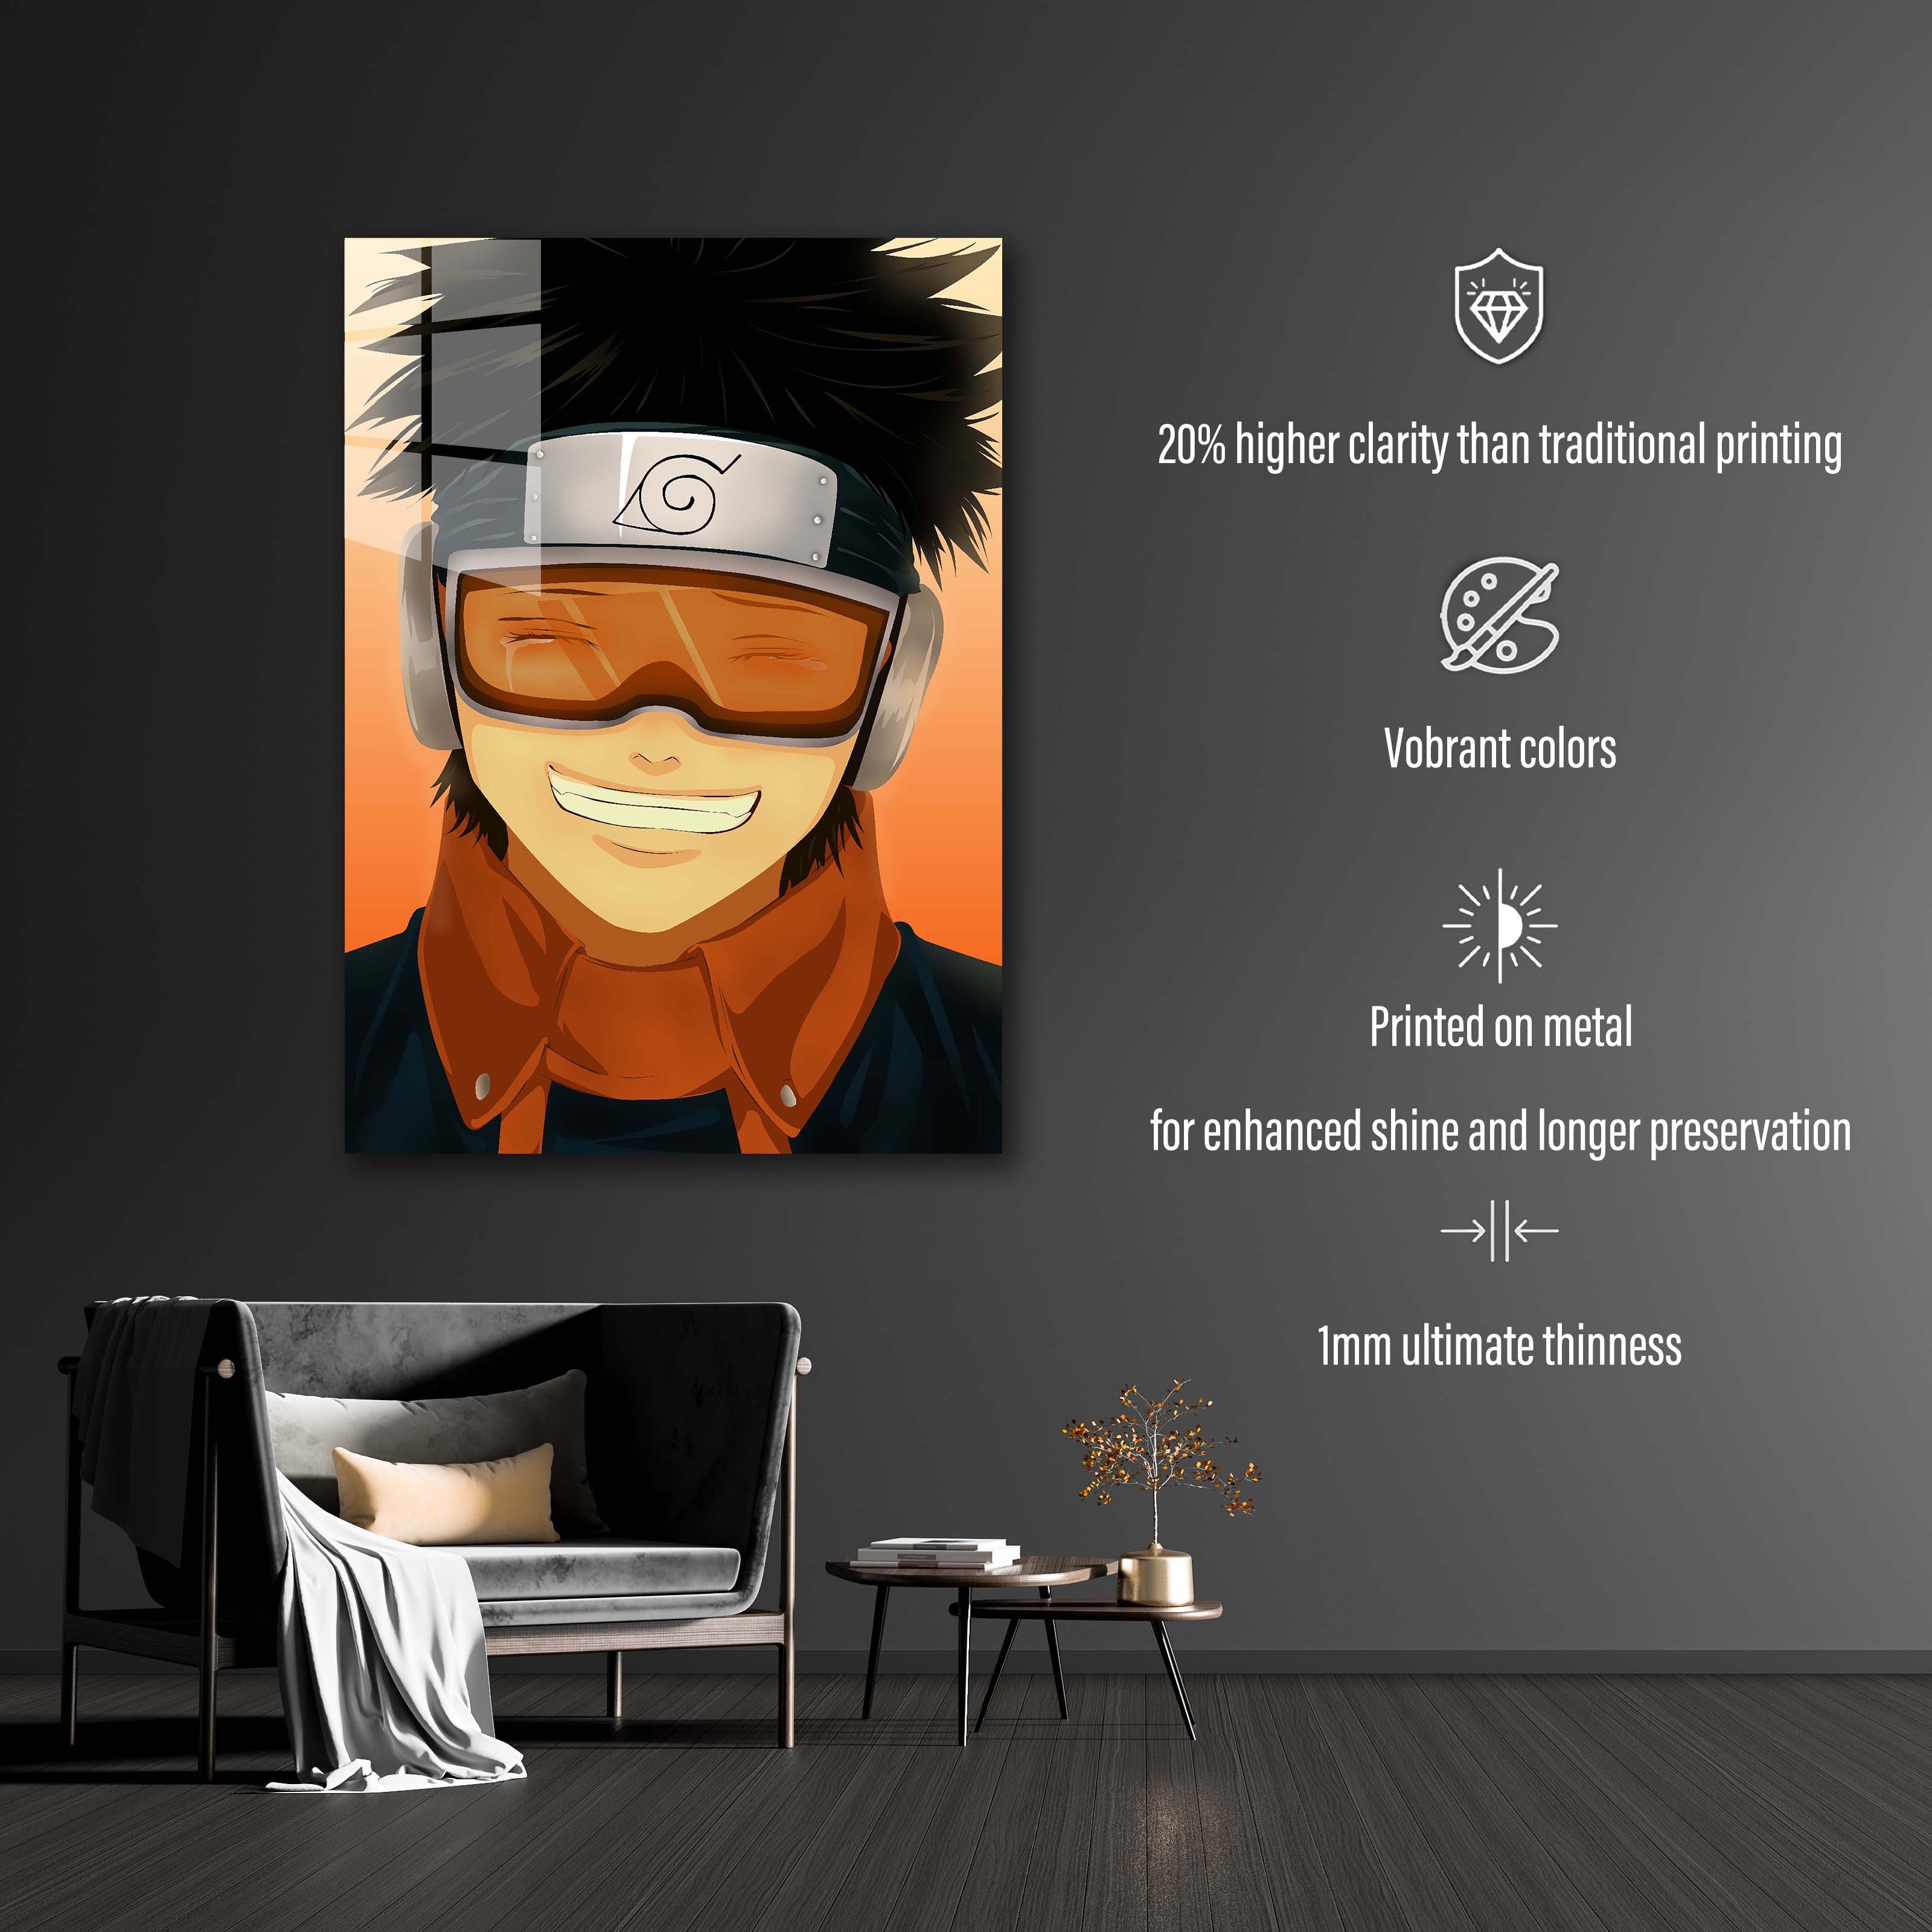 obito uchiha-designed by @Inspire Collection